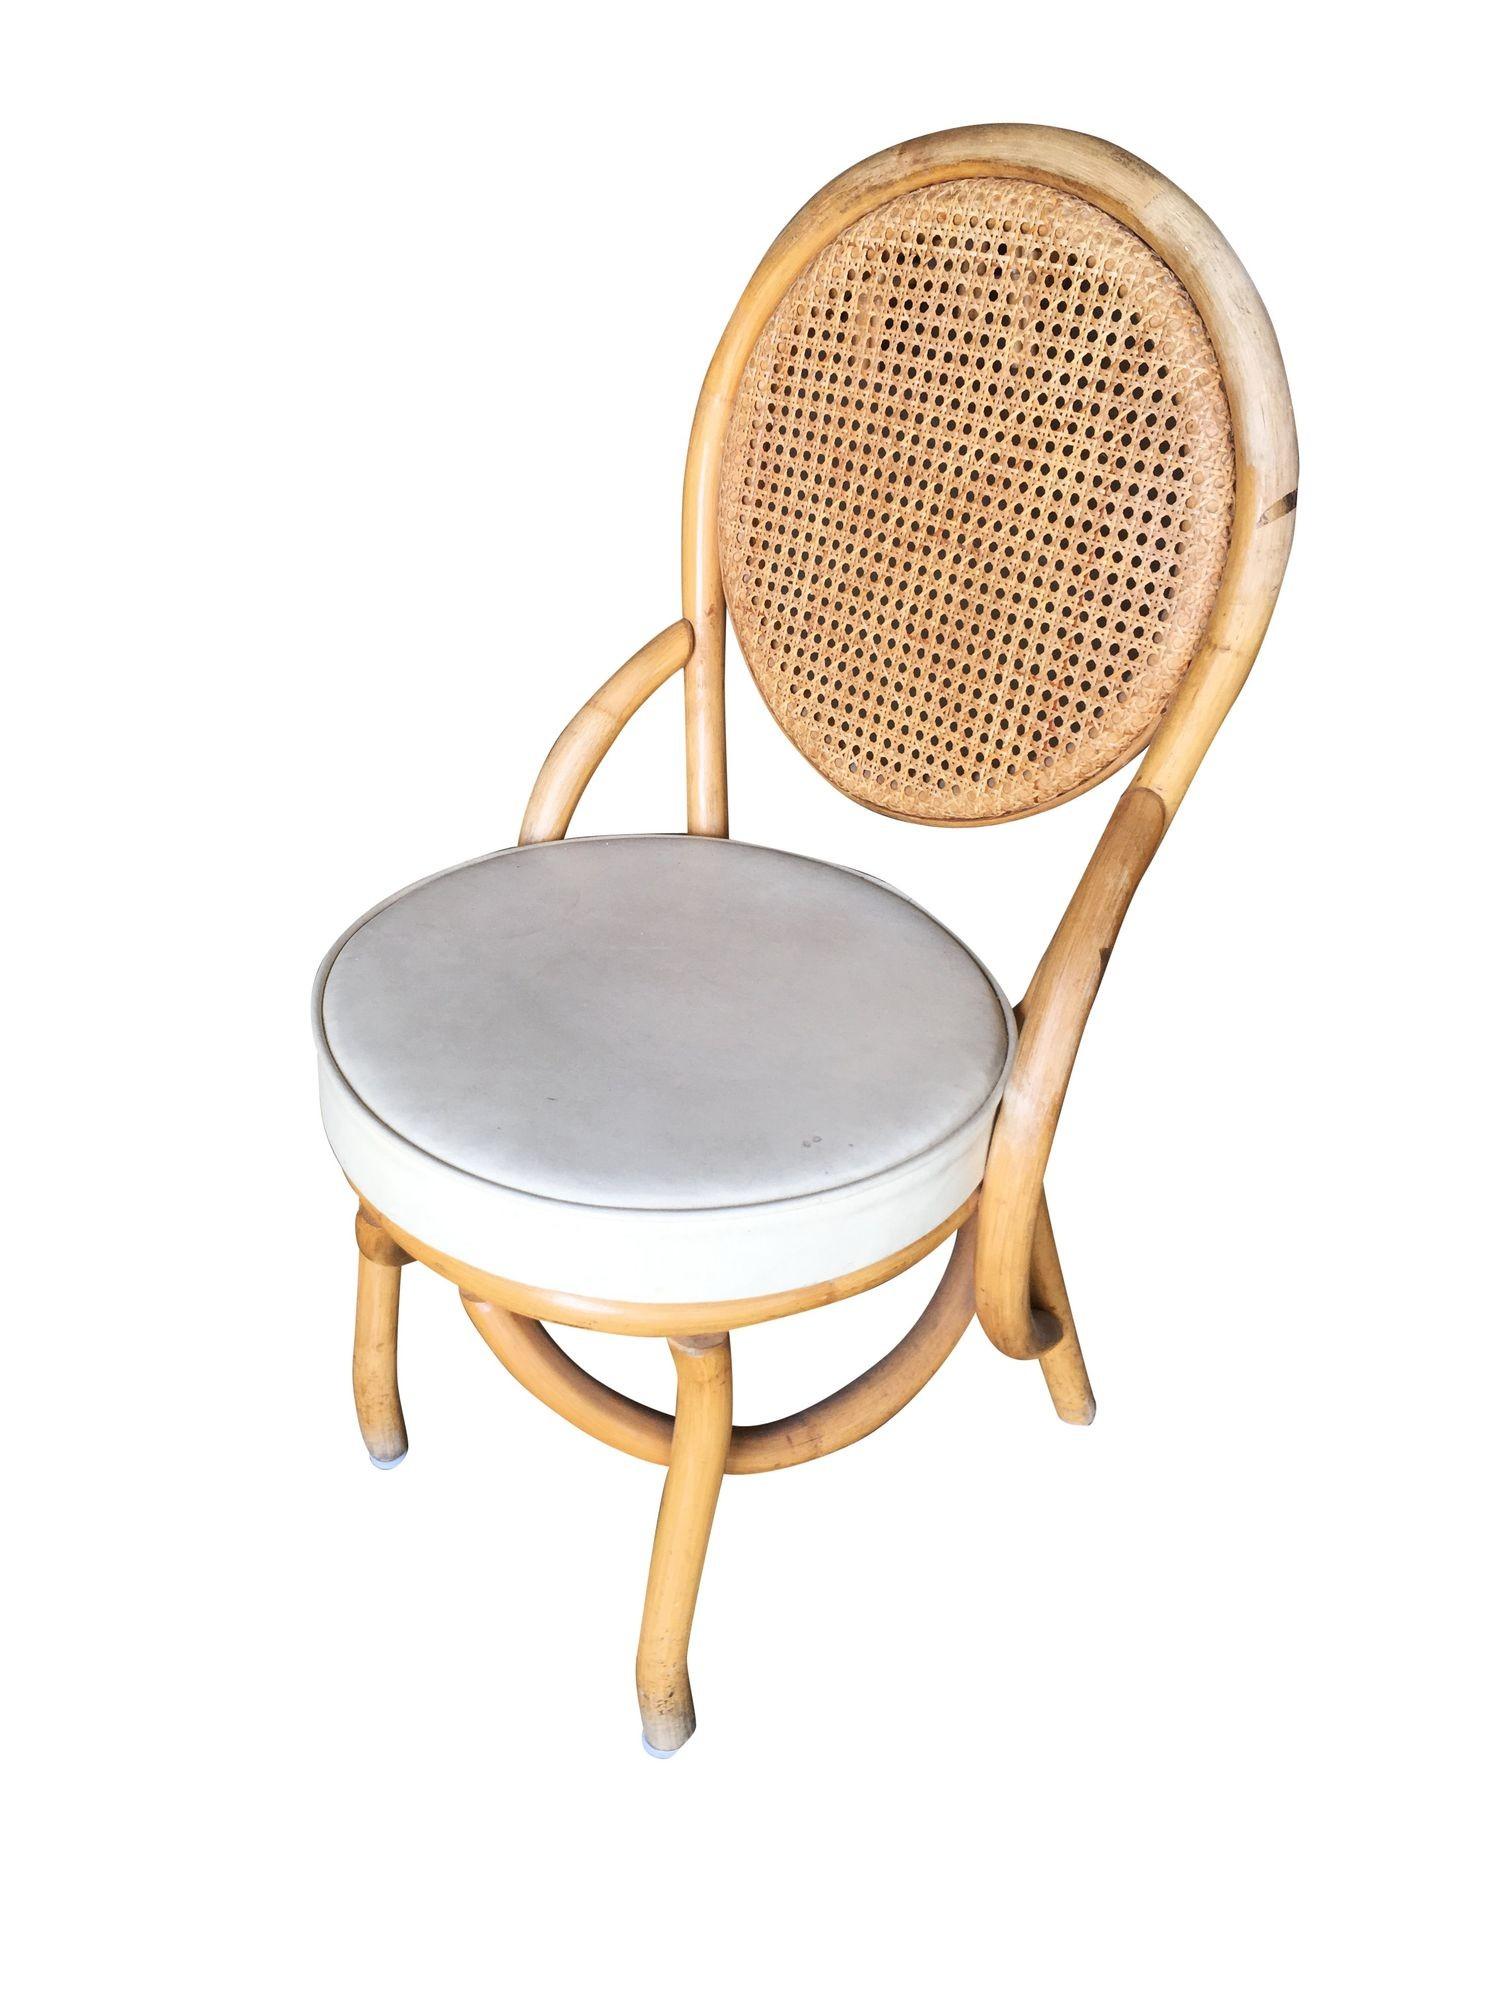 Set of Six Post-war 1950s rattan dining side chairs with woven wicker seat back and white vinyl seat.
We only purchase and sell only the best and finest rattan furniture made by the best and most well-known American designers and manufacturers